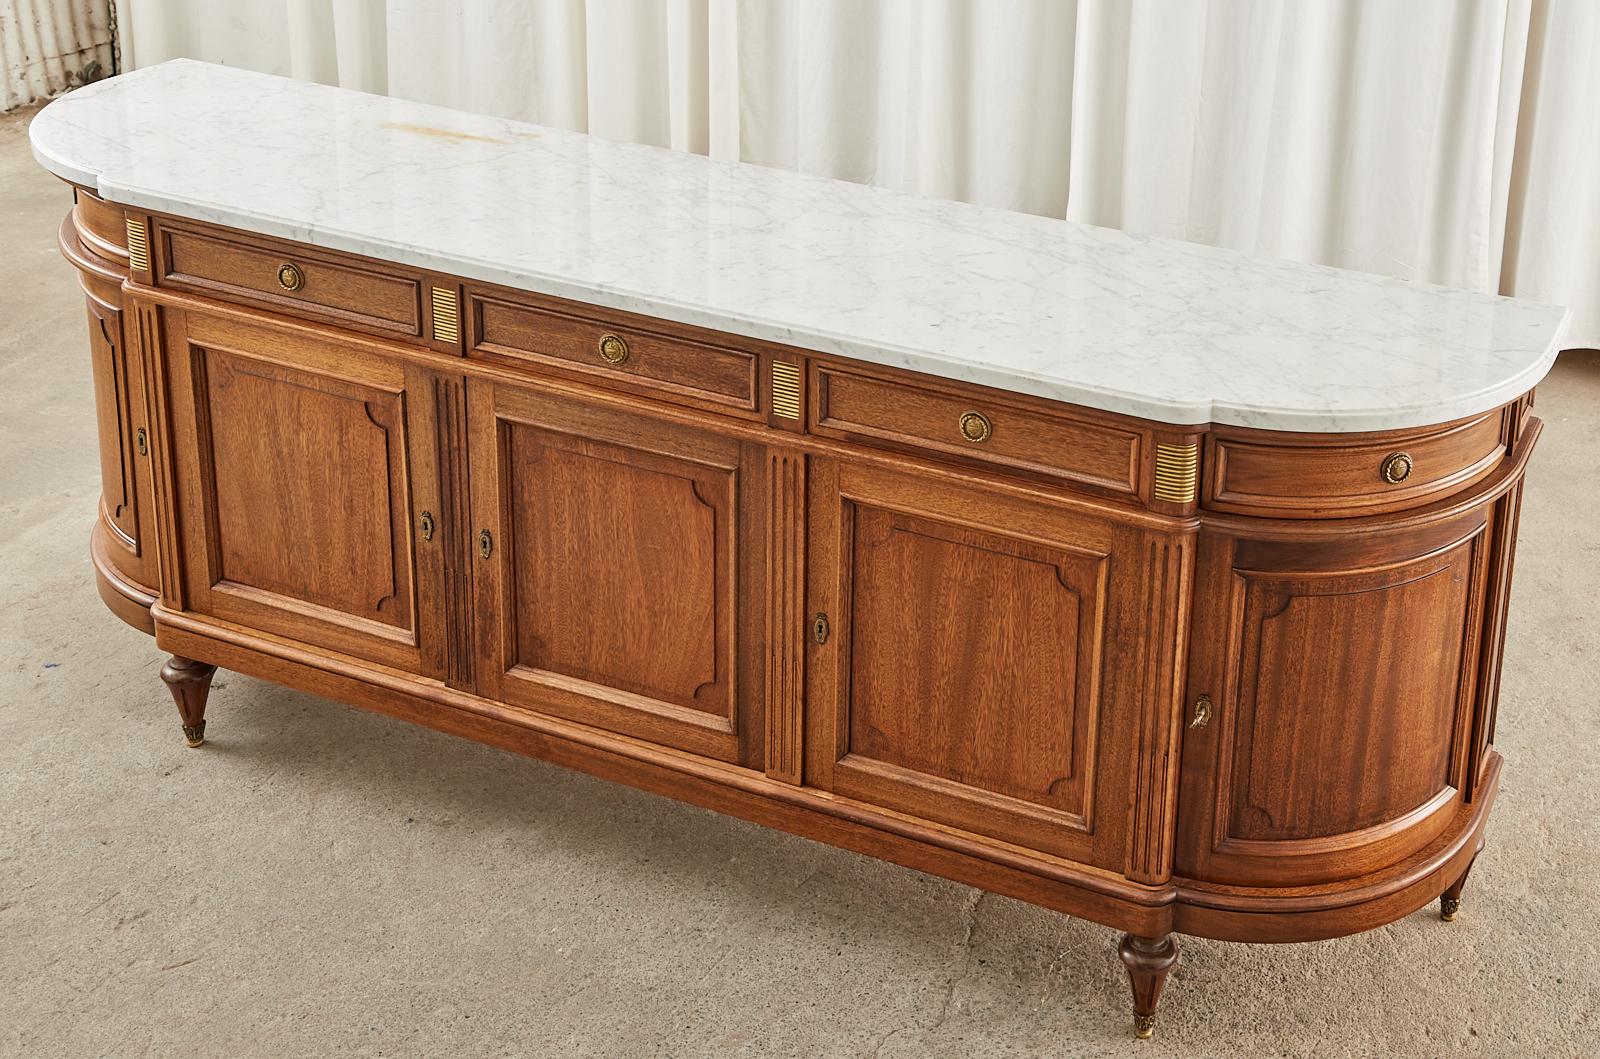 Grand French mahogany sideboard server or buffet featuring a 1 inch thick Cararra marble slab top with a conforming ogee edge. Beautifully crafted in the French Louis XVI neoclassical taste embellished with bronze mounts. The case has gracefully